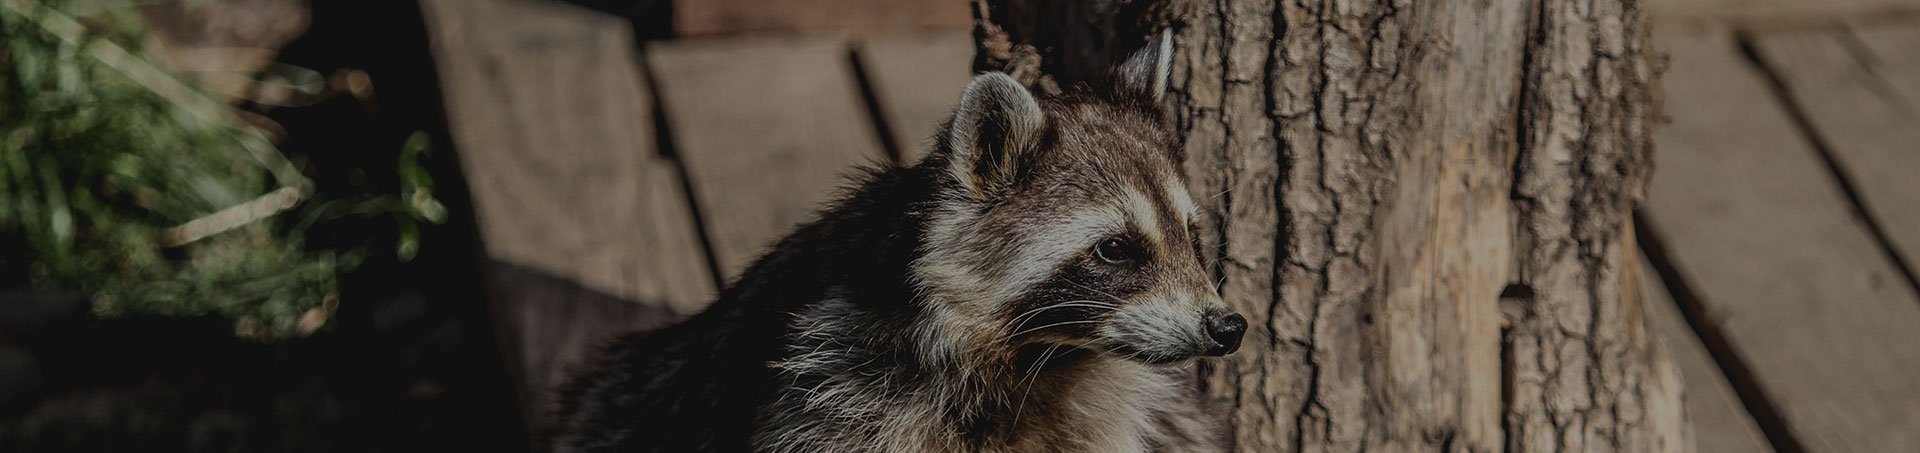 Raccoon Removal Specialists Florida